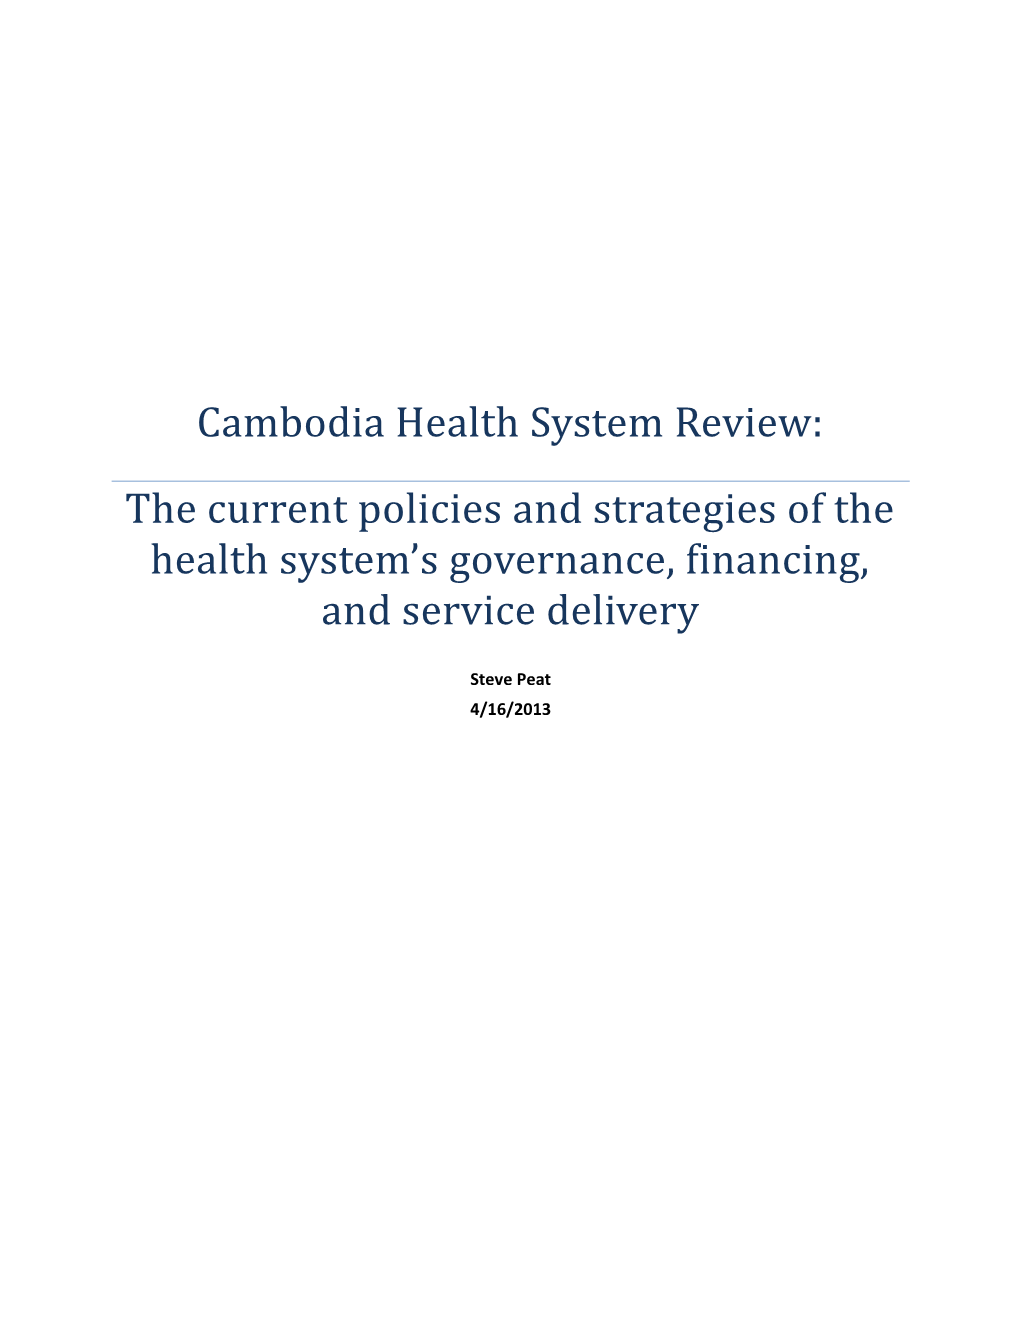 Cambodia Health System Review: the Current Policies and Strategies of the Health System’S Governance, Financing, and Service Delivery